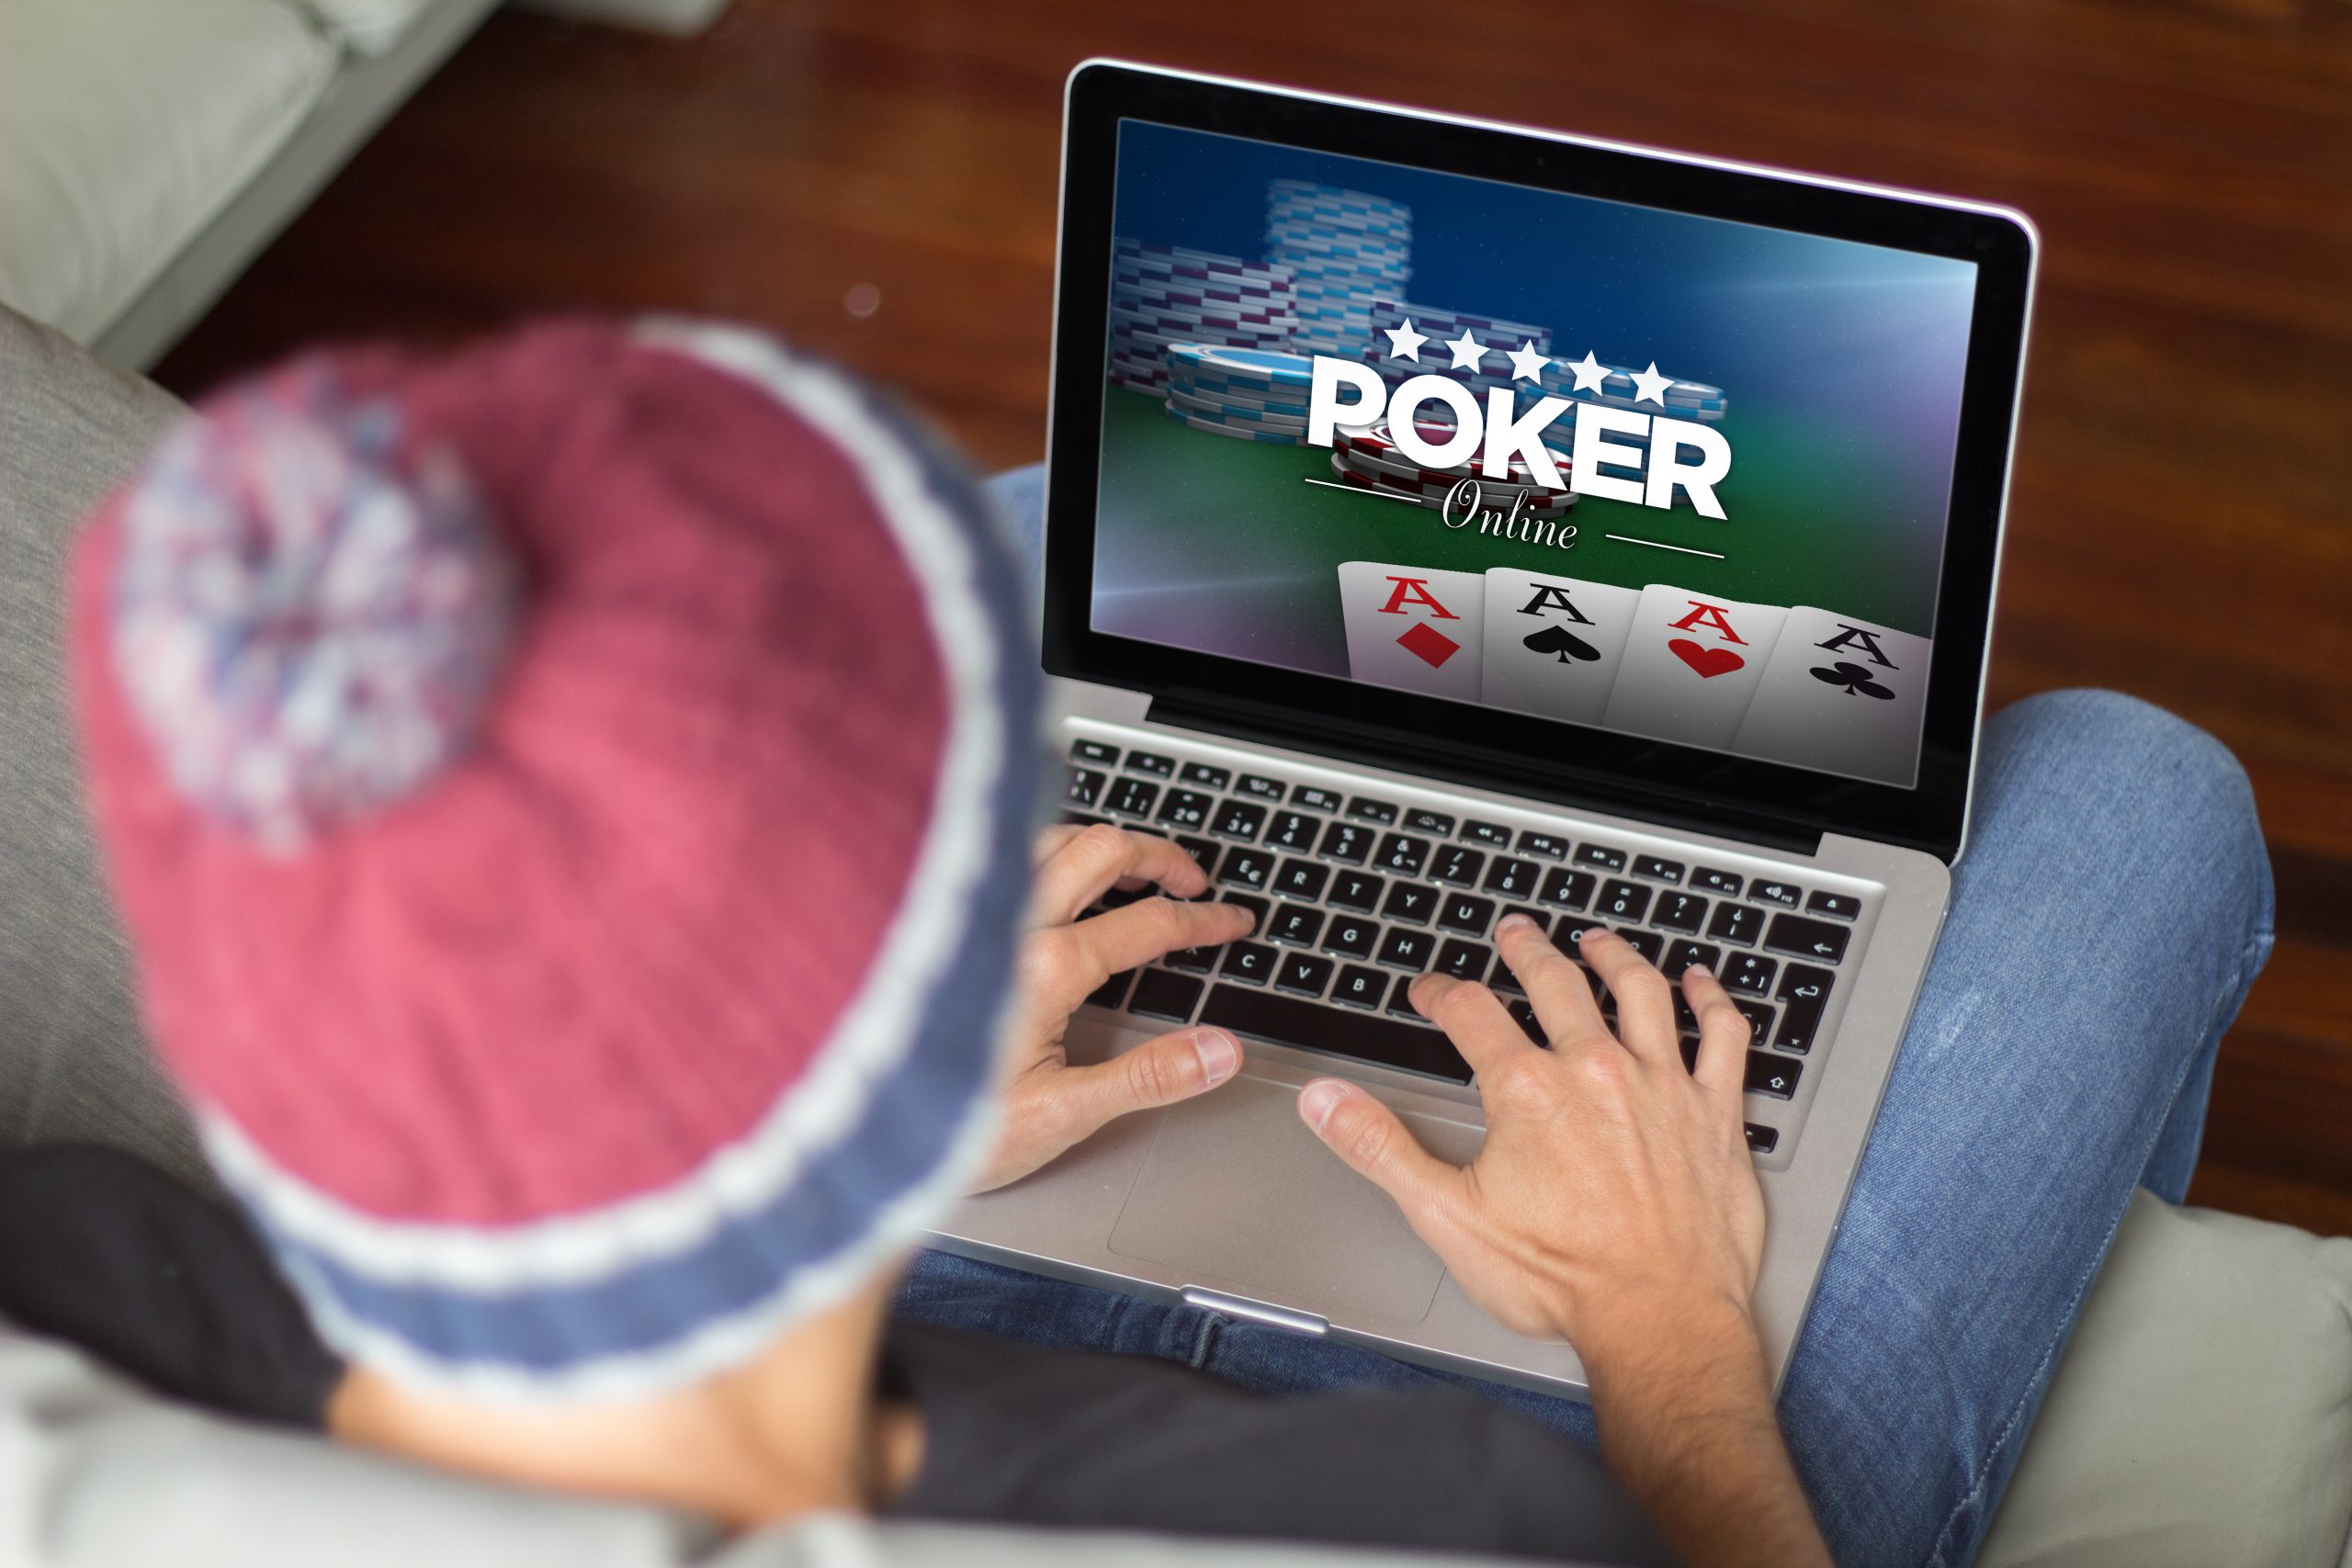 Why should you play poker online